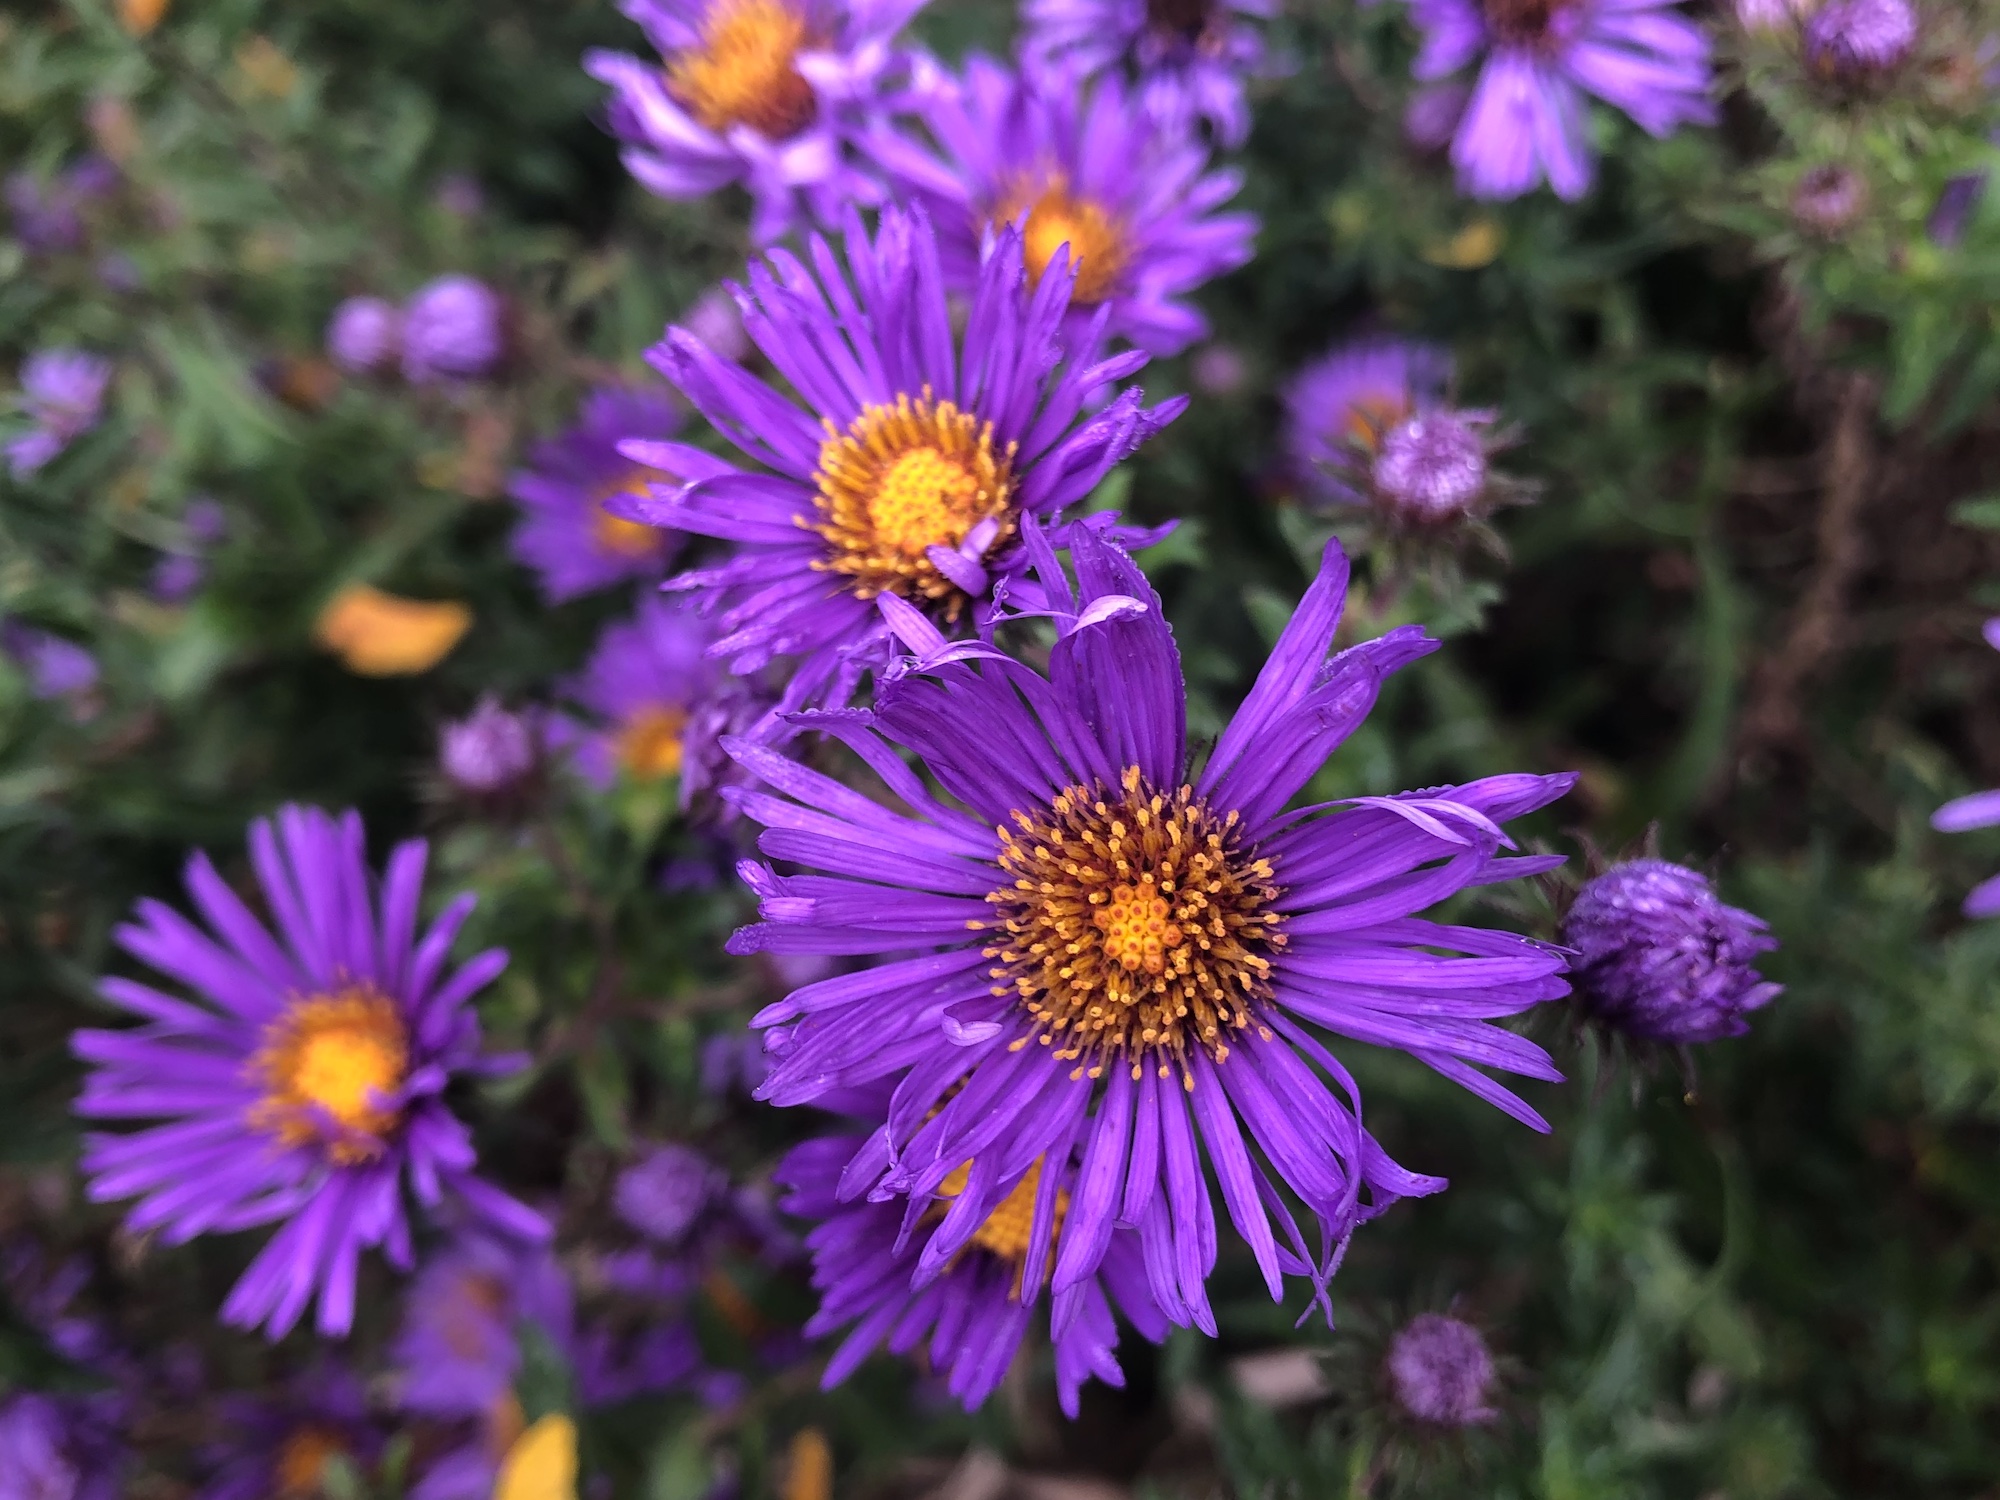 New England Aster in Oak Savanna in Madison, Wisconsin on September 17, 2019.